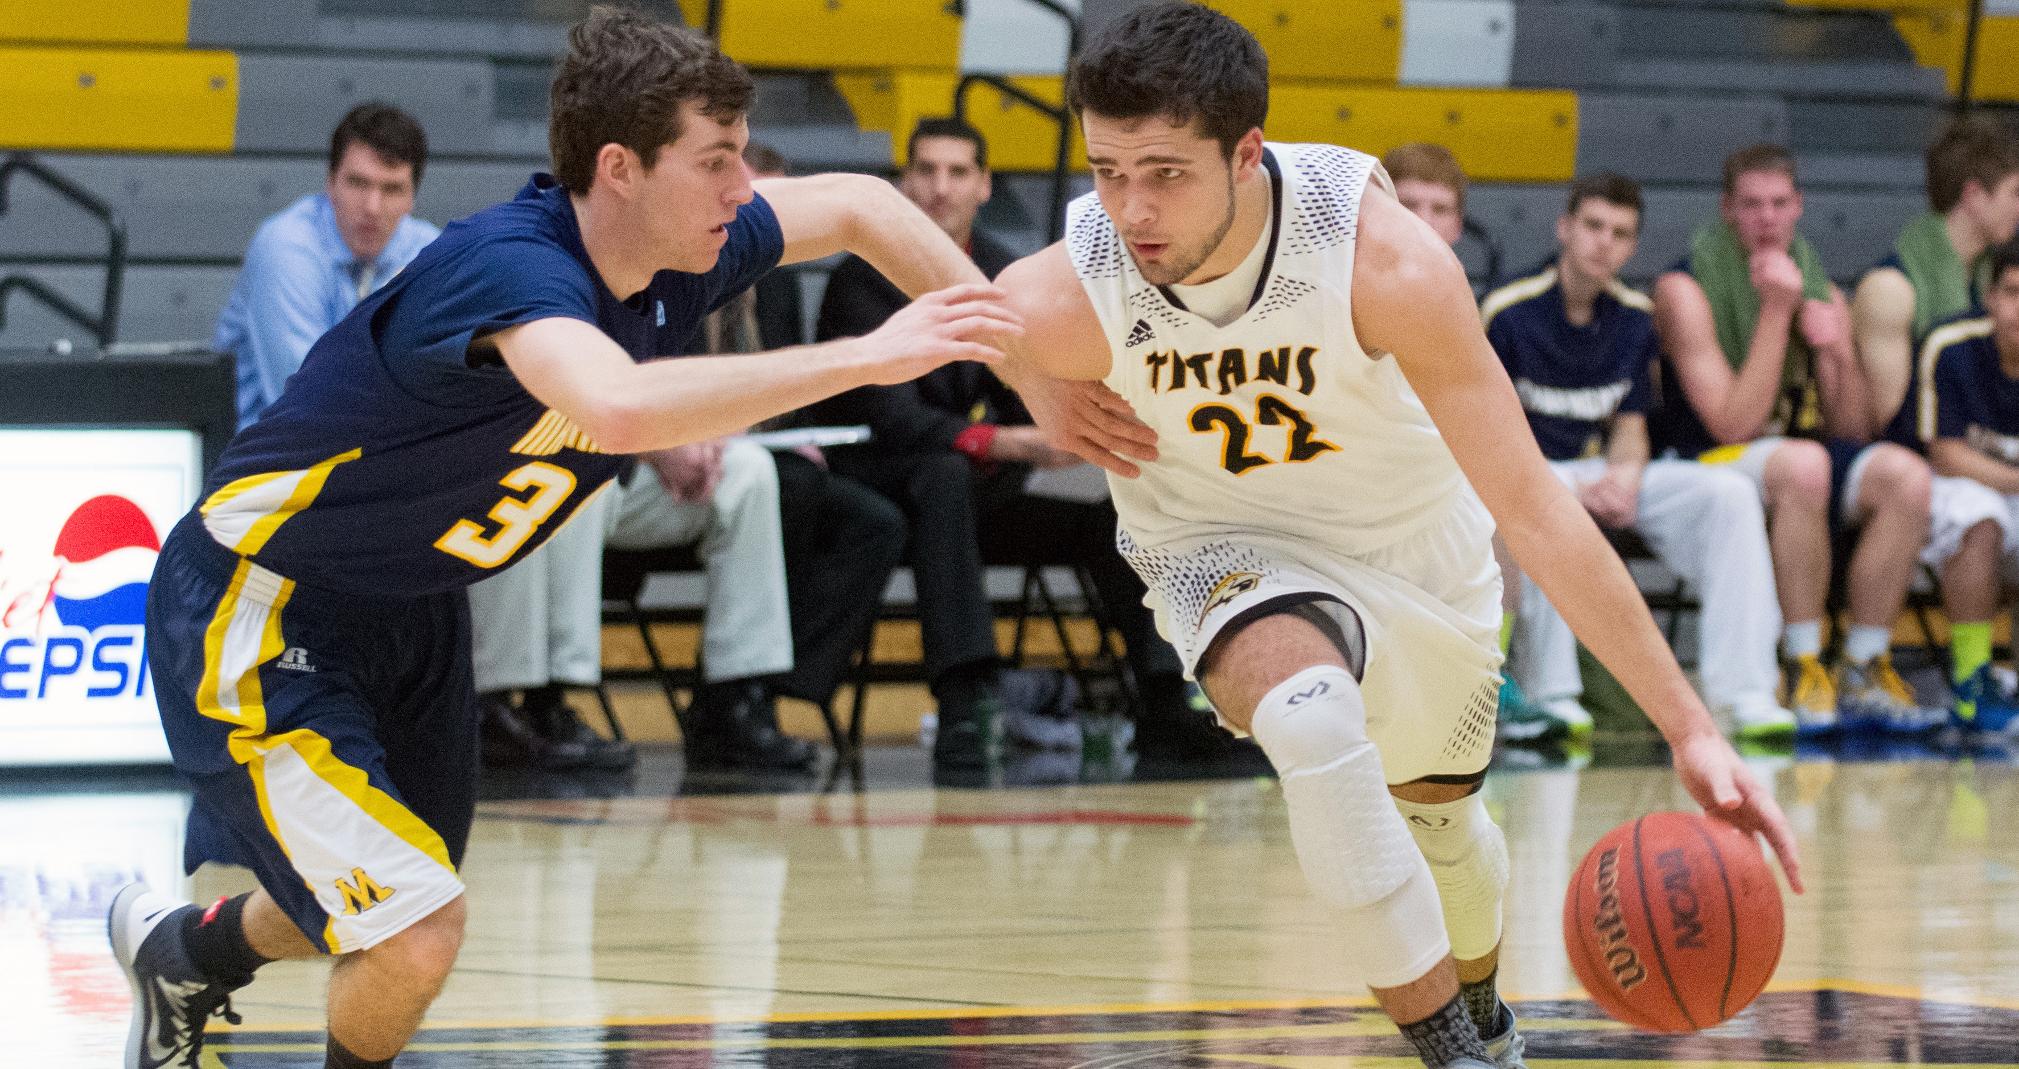 Brandon Glandt came off the bench to total nine points and three steals, both career bests.